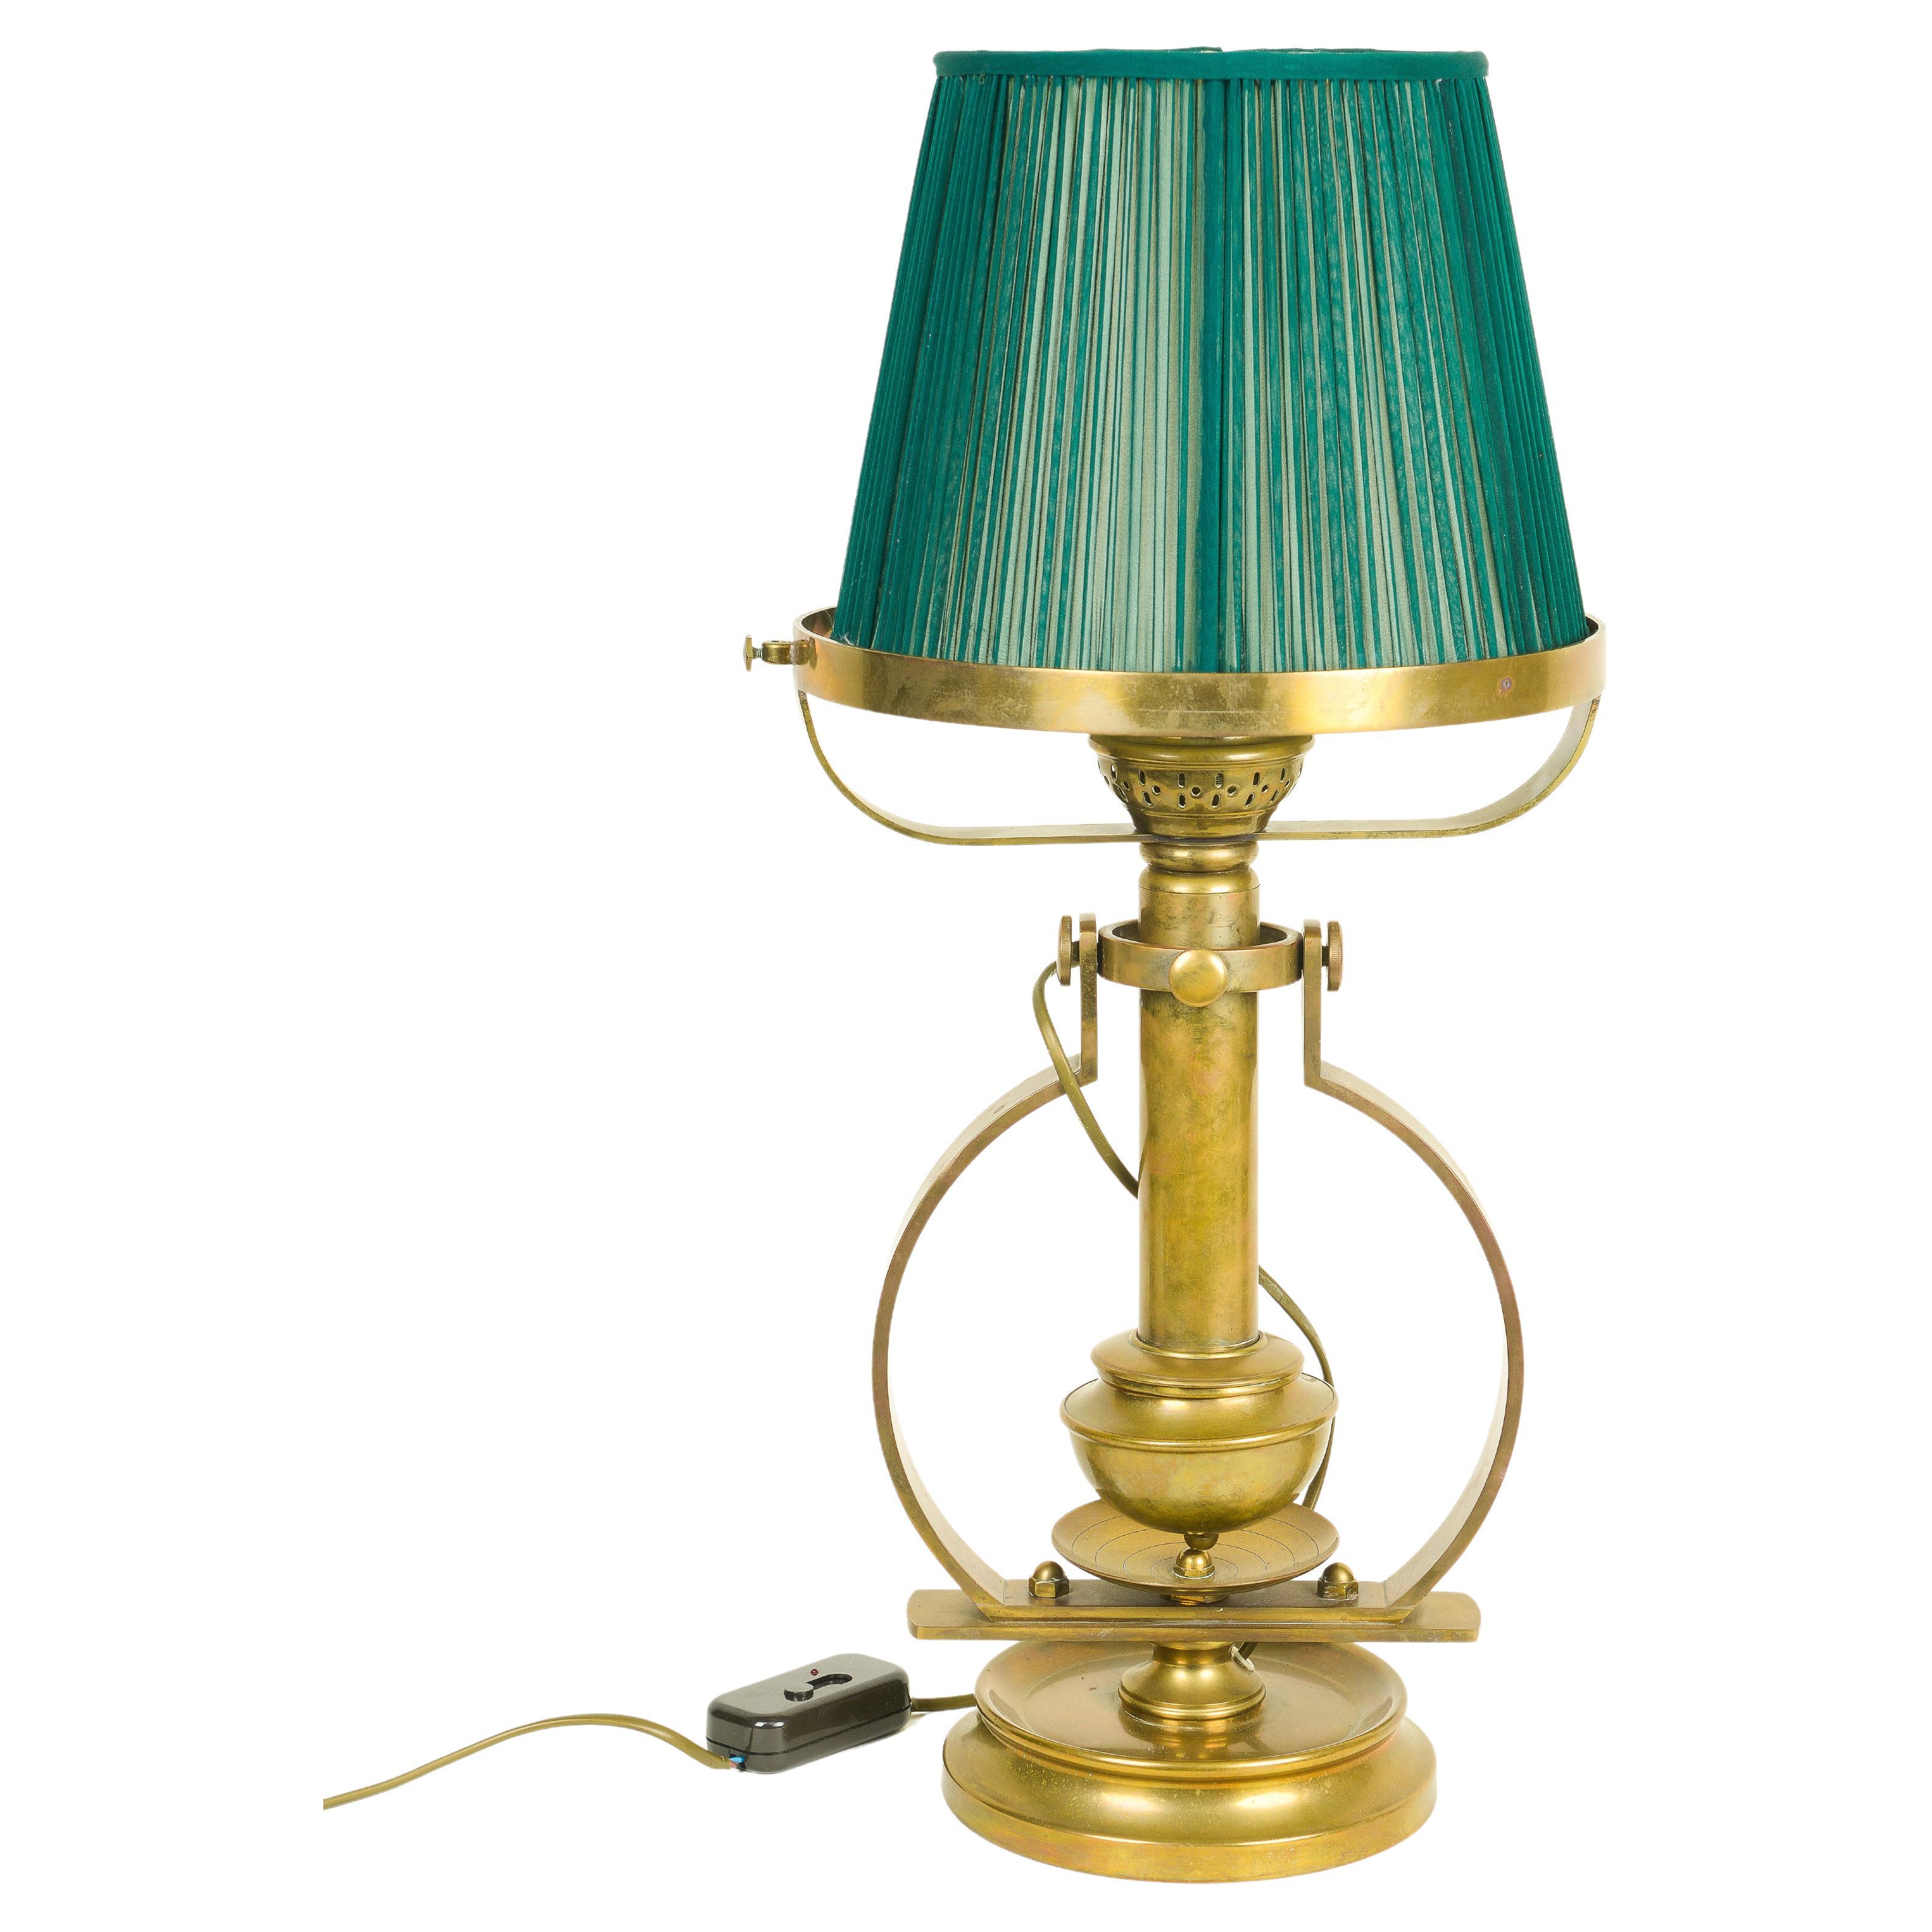 Ship's Electric Solid Brass Gimballed Lamp